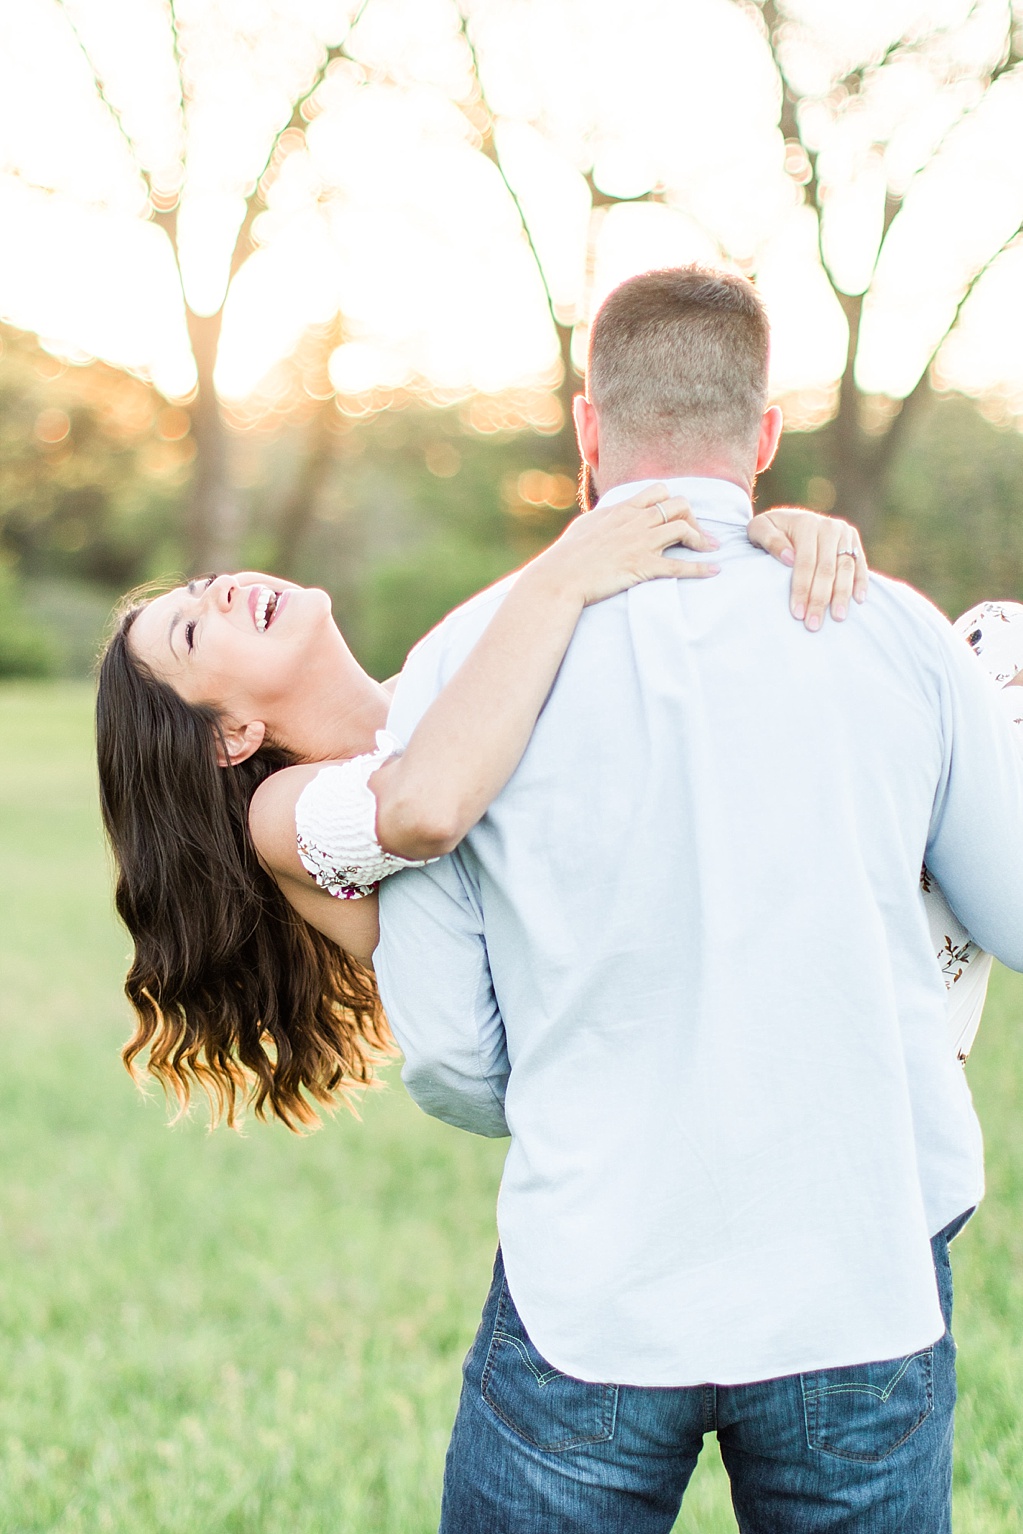 Eagle Dancer Ranch Engagement Photo Session in Boerne, Texas by Allison Jeffers Photography 0042